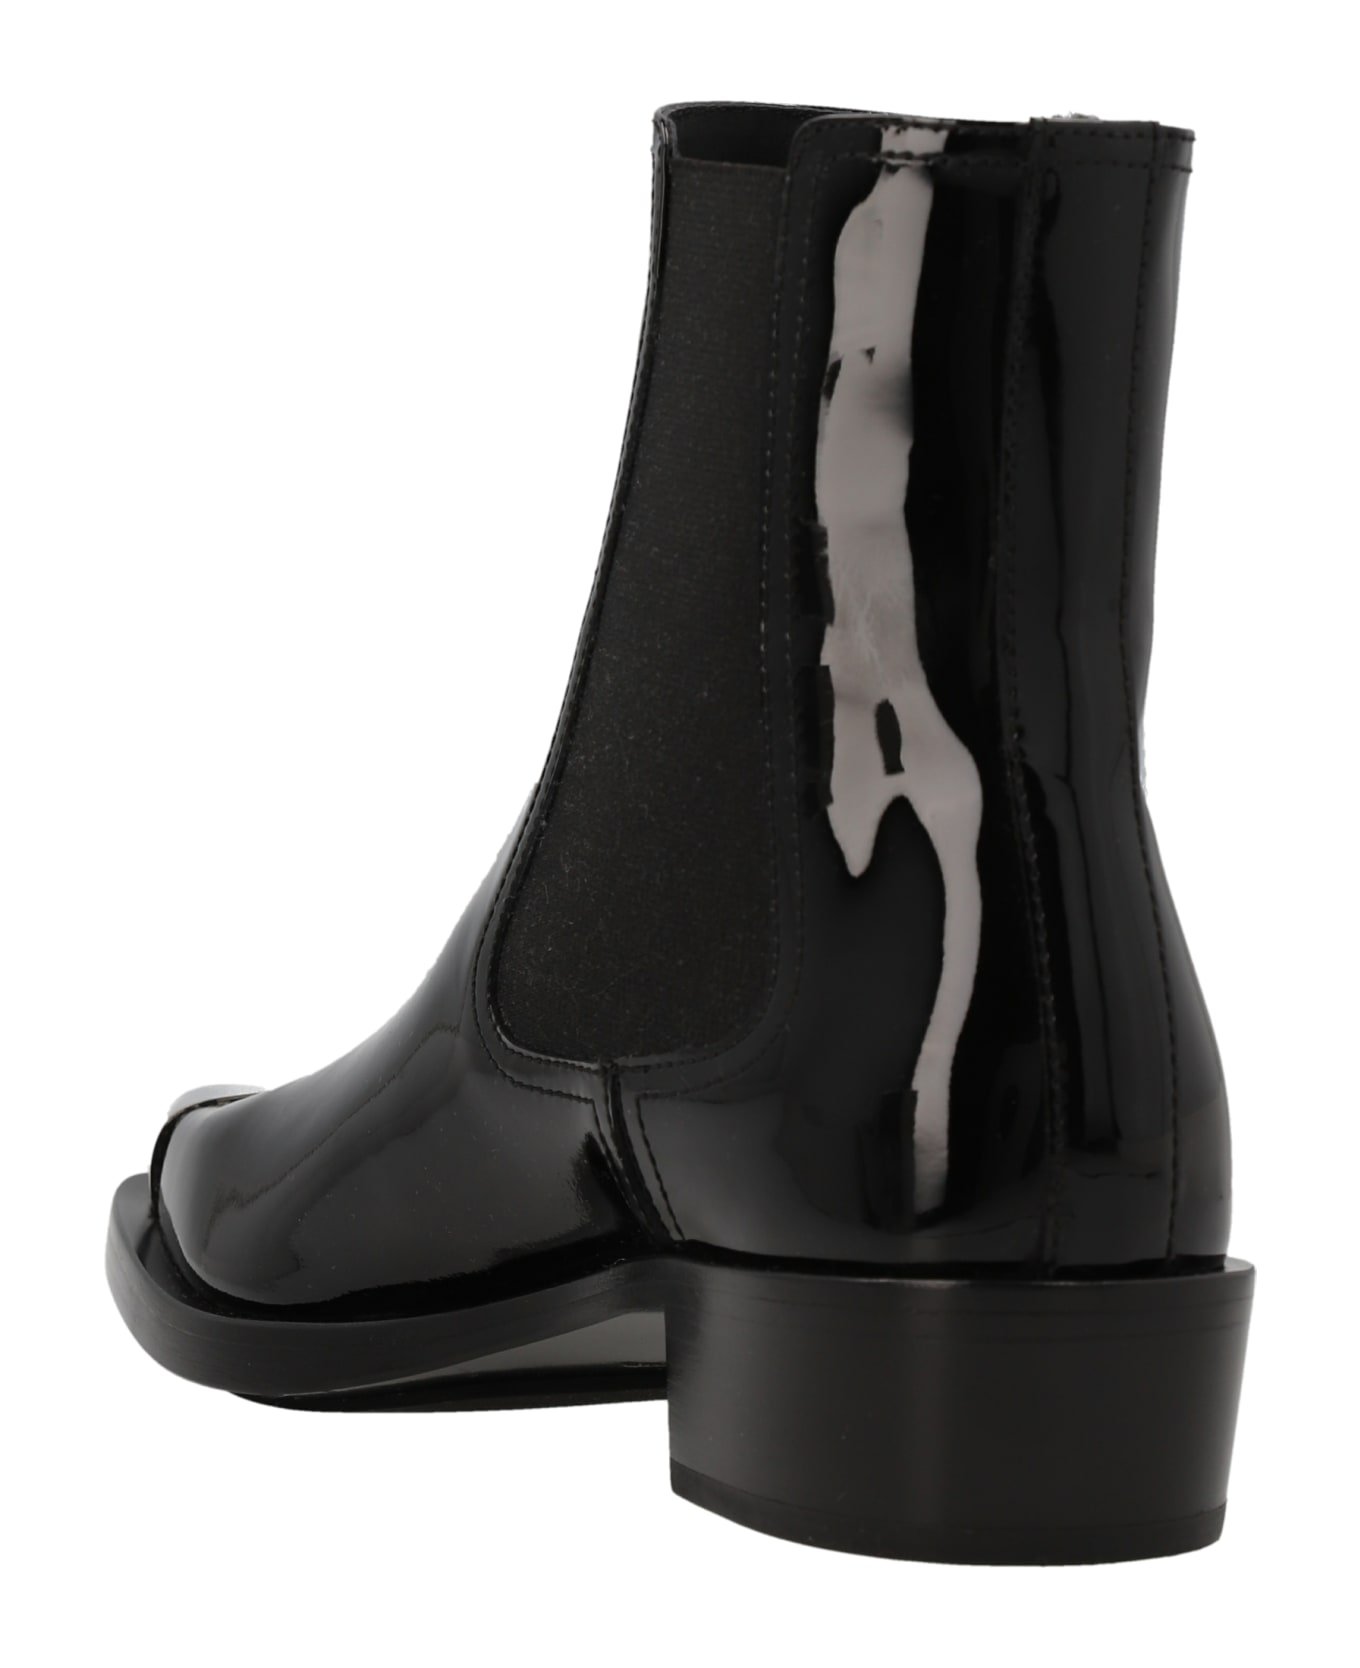 Alexander McQueen Patent Ankle Boots - Black  